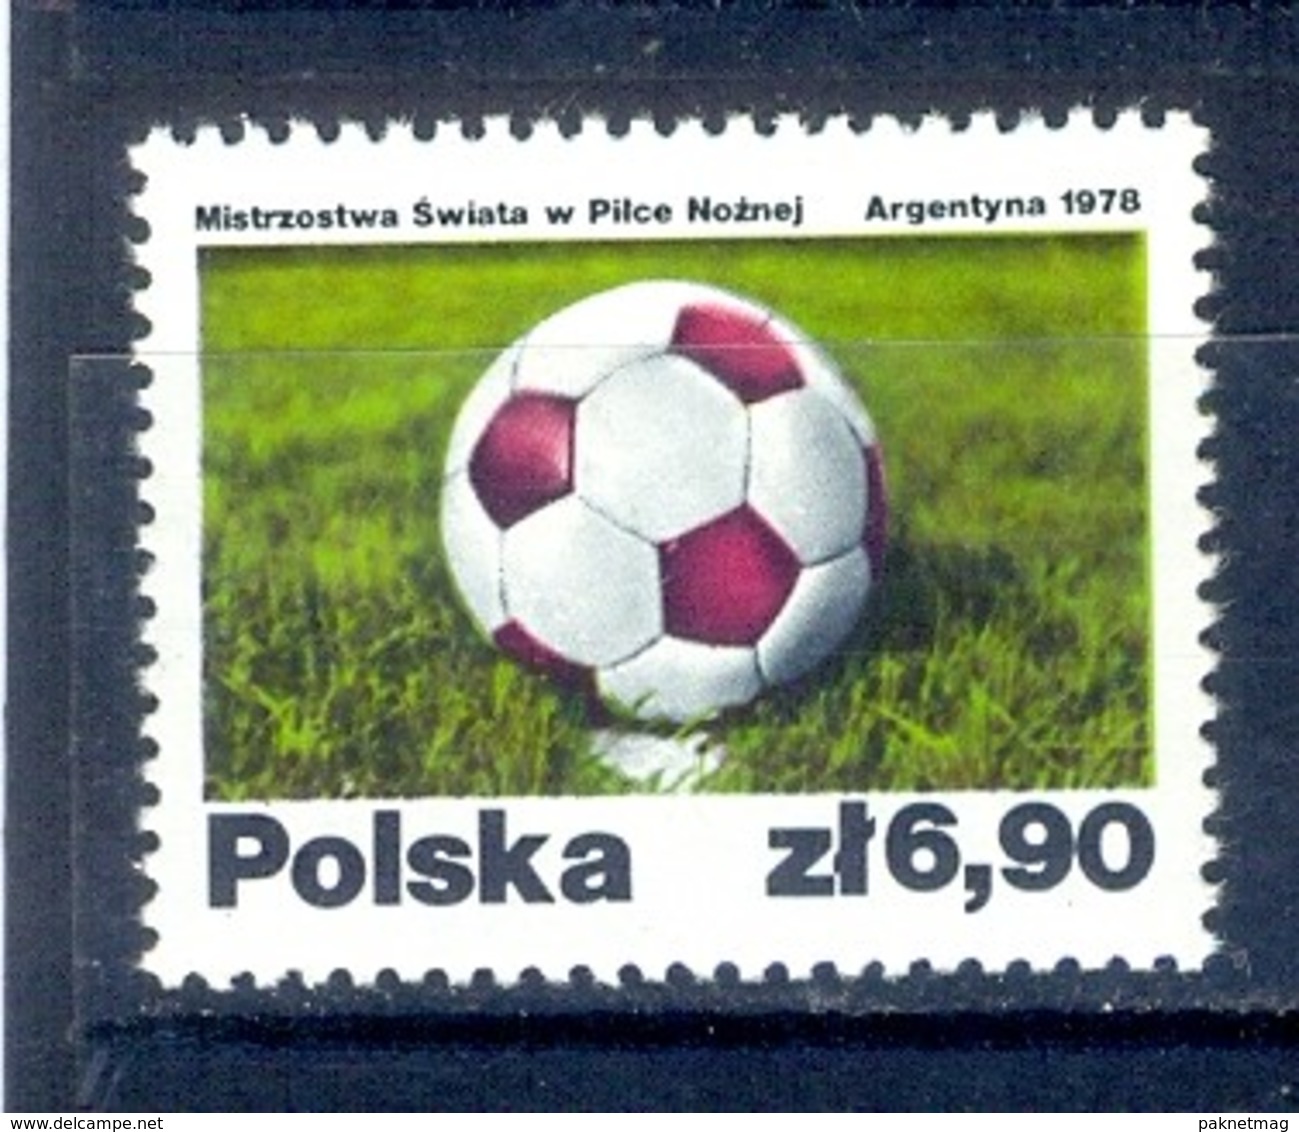 N55-65- Fifteen Stamps of Small Collection of Football. Poland Belgium Italy Russia & Honduras.